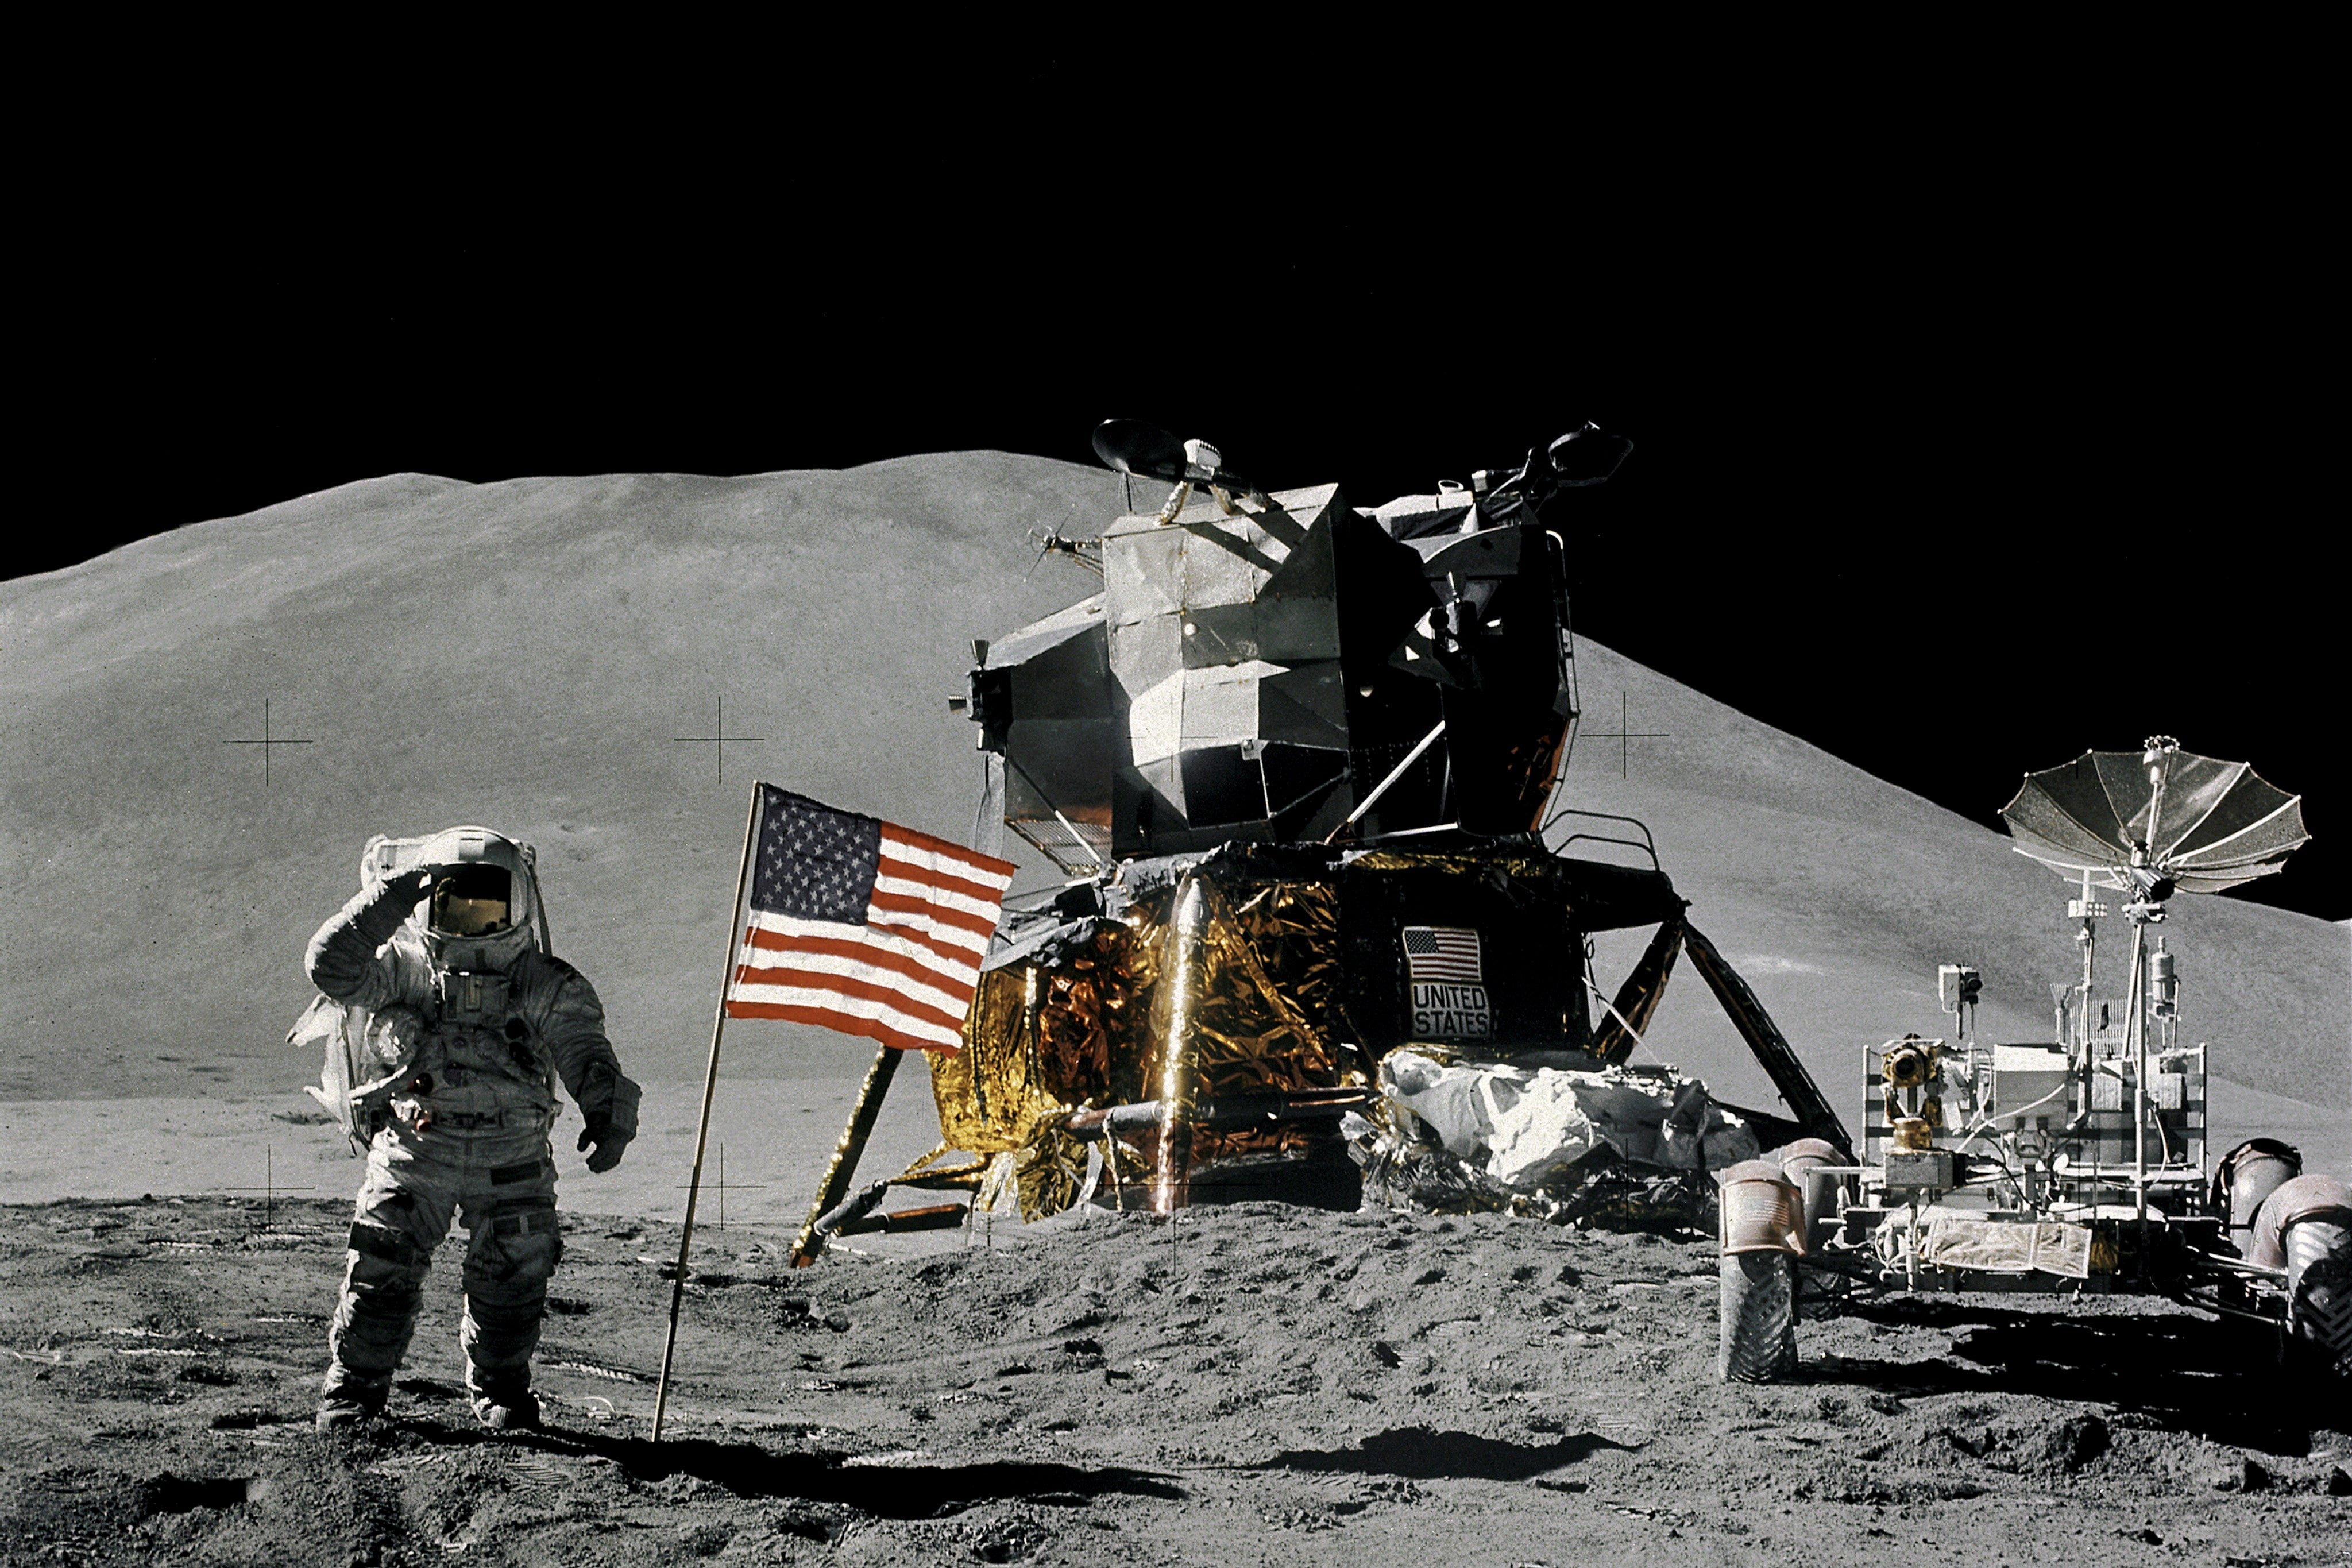 An astronaut on the moon salutes the camera while standing by an American flag and the lunar lander and rover.